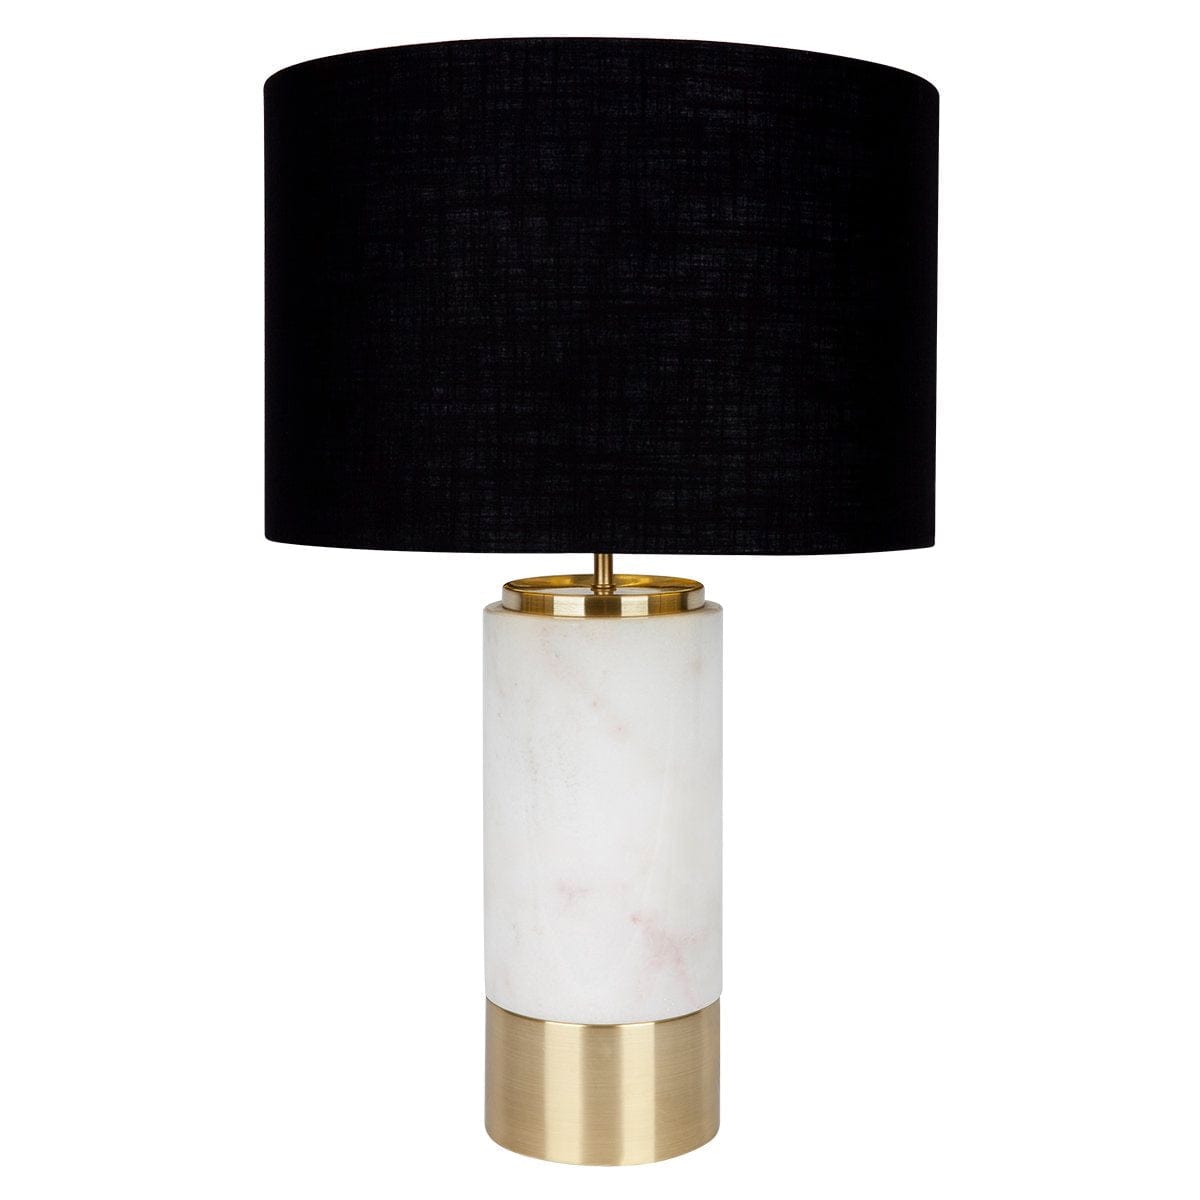 CAFE LIGHTING & LIVING Table Lamp Paola Marble Table Lamp - White w Black Shade B11554